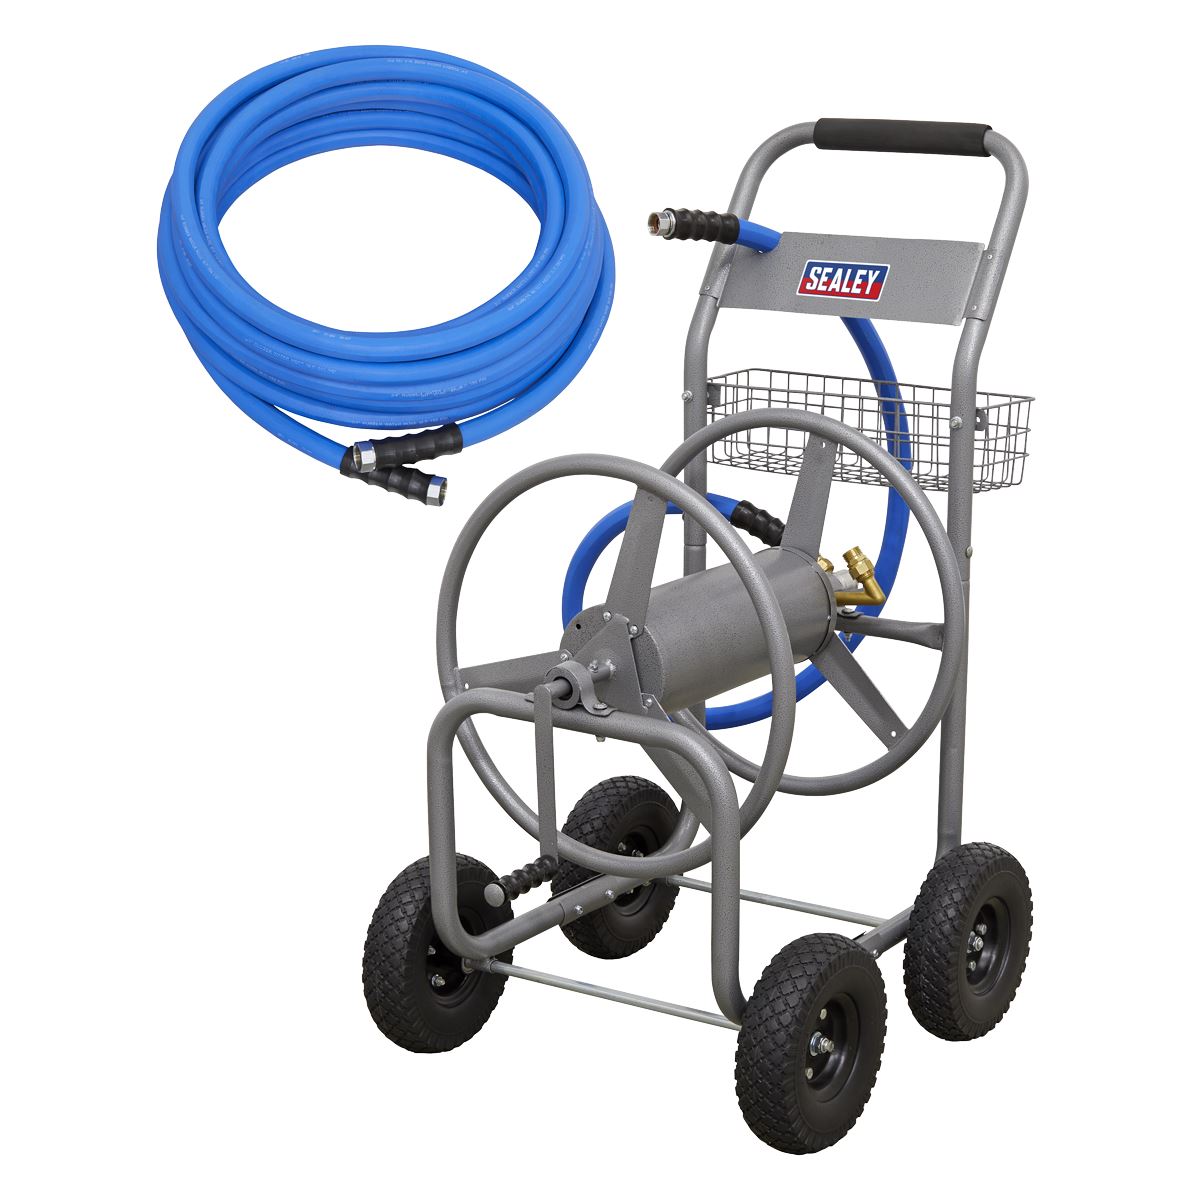 Sealey Heavy-Duty Hose Reel Cart with 15m Heavy-Duty Ø19mm Hot & Cold Rubber Water Hose